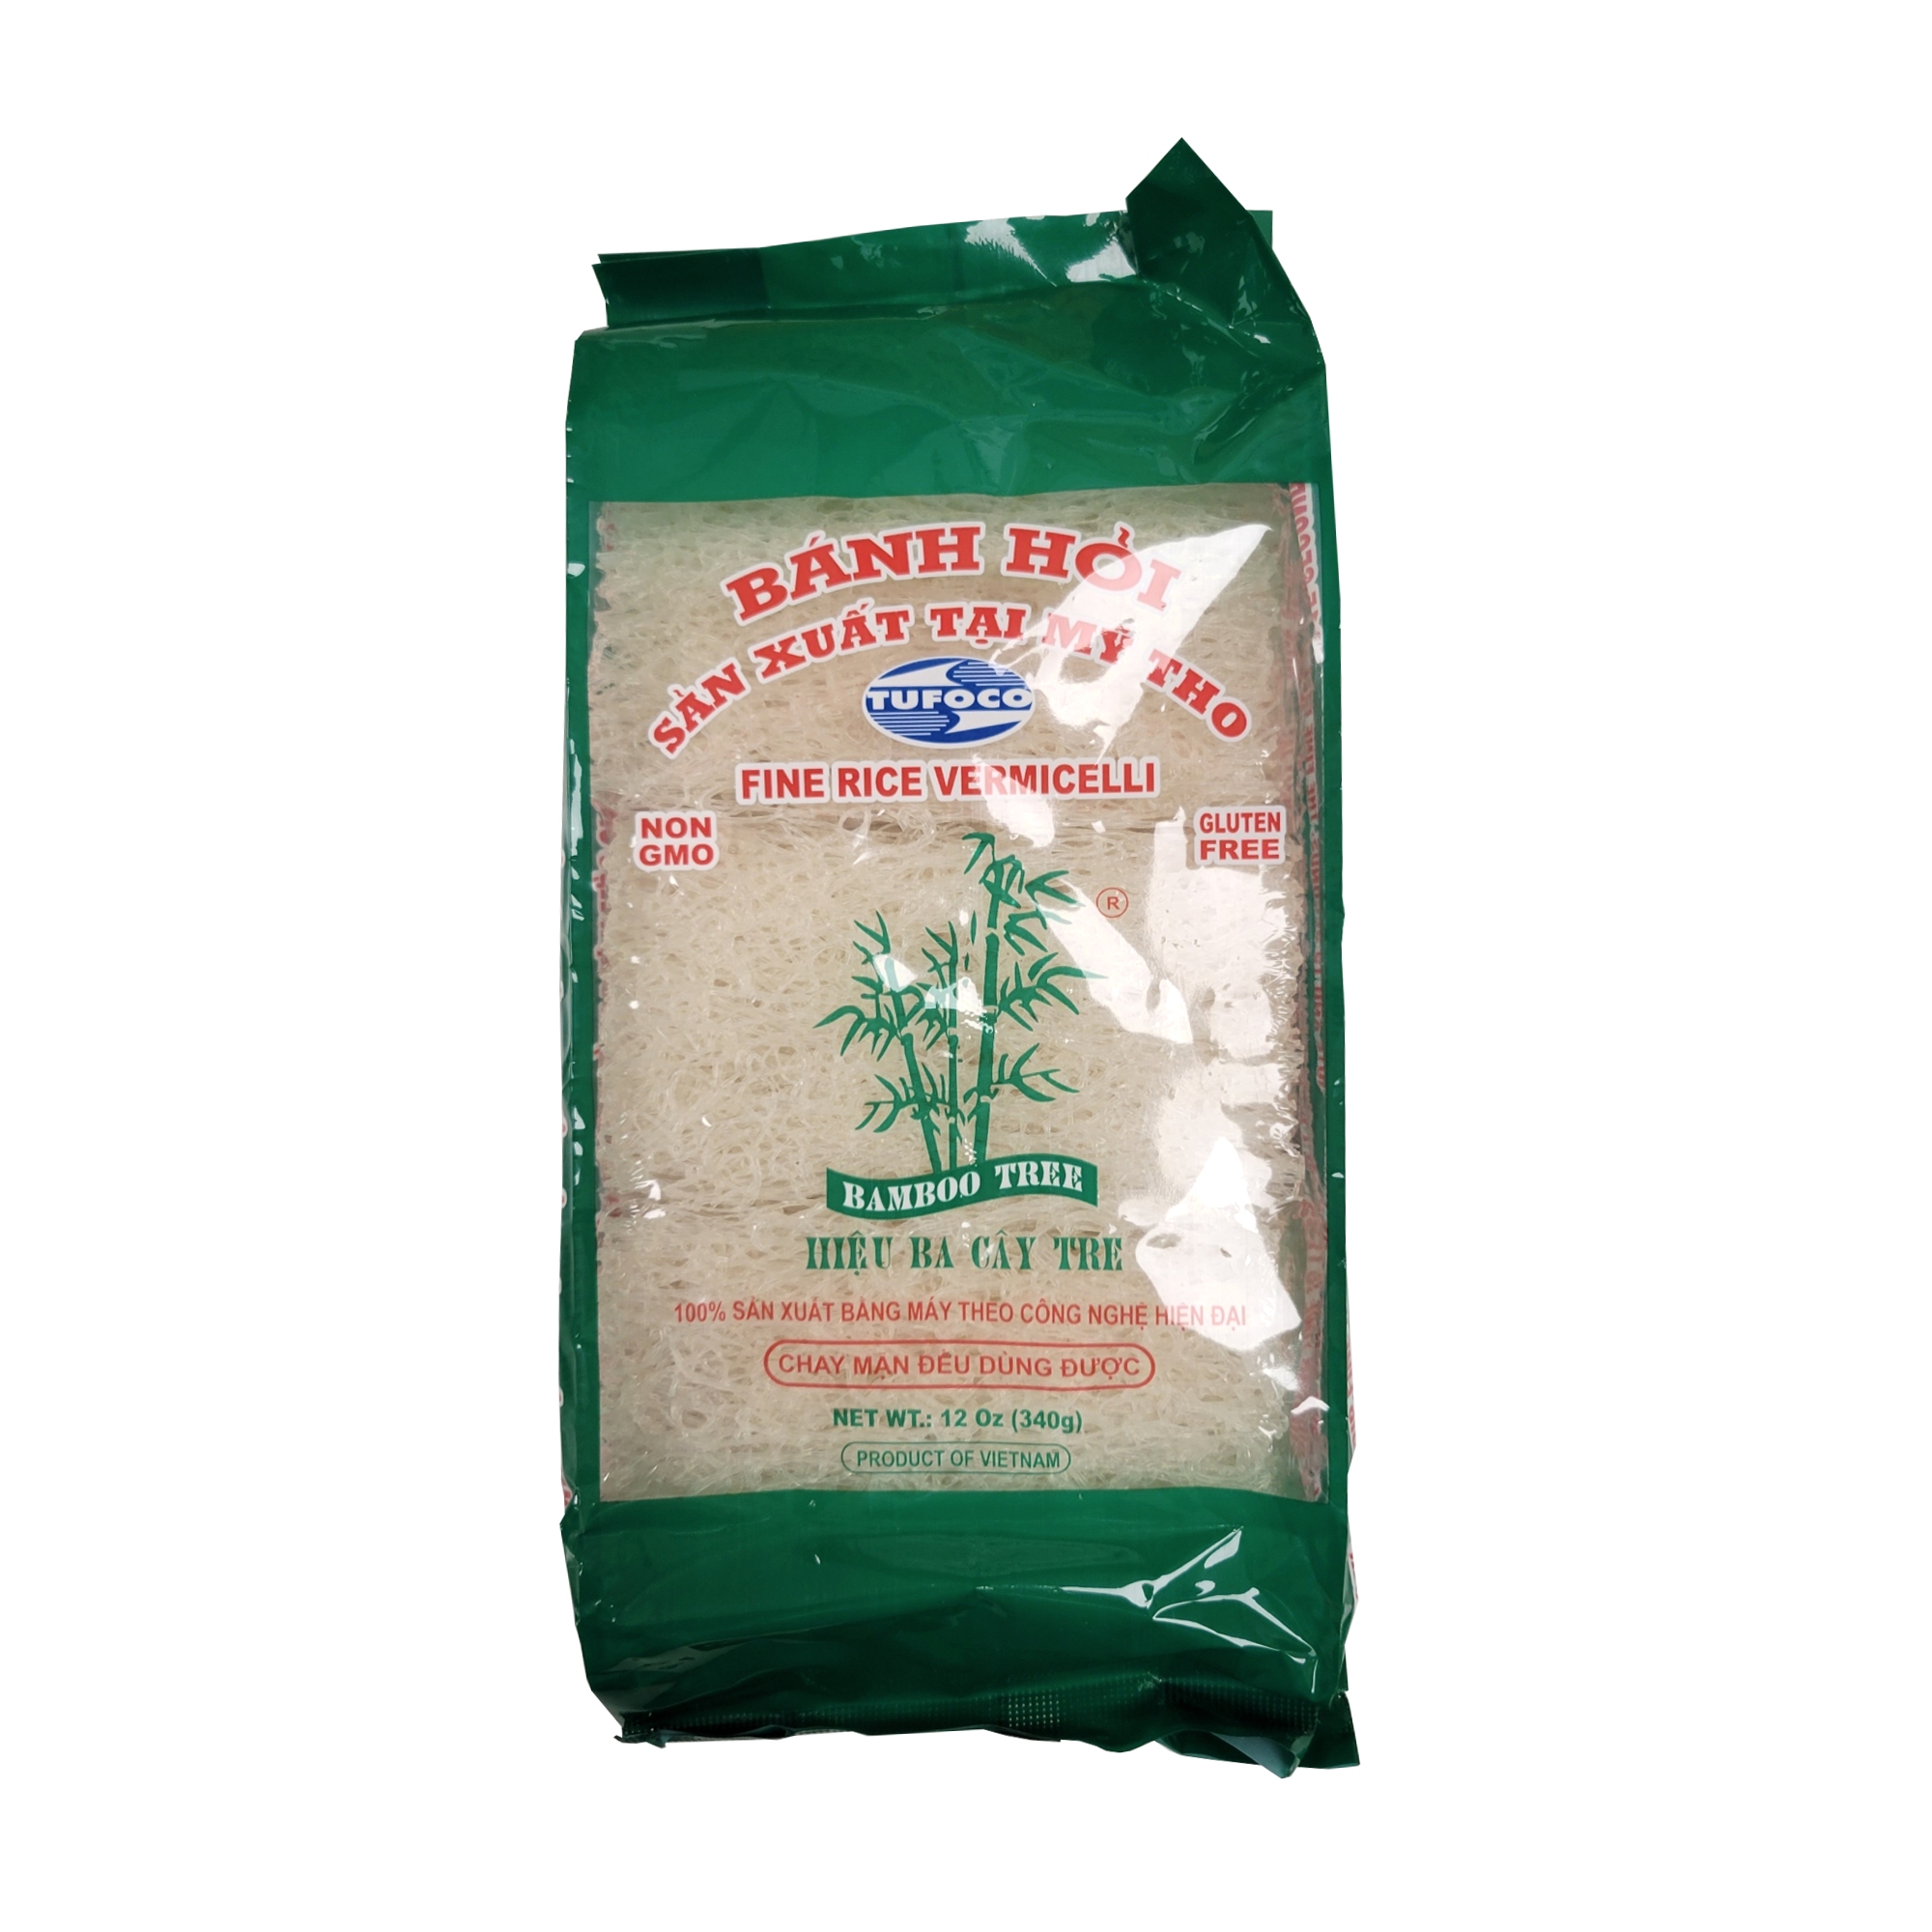 BAMBOO TREE FINE RICE VERMICELLI ND301050